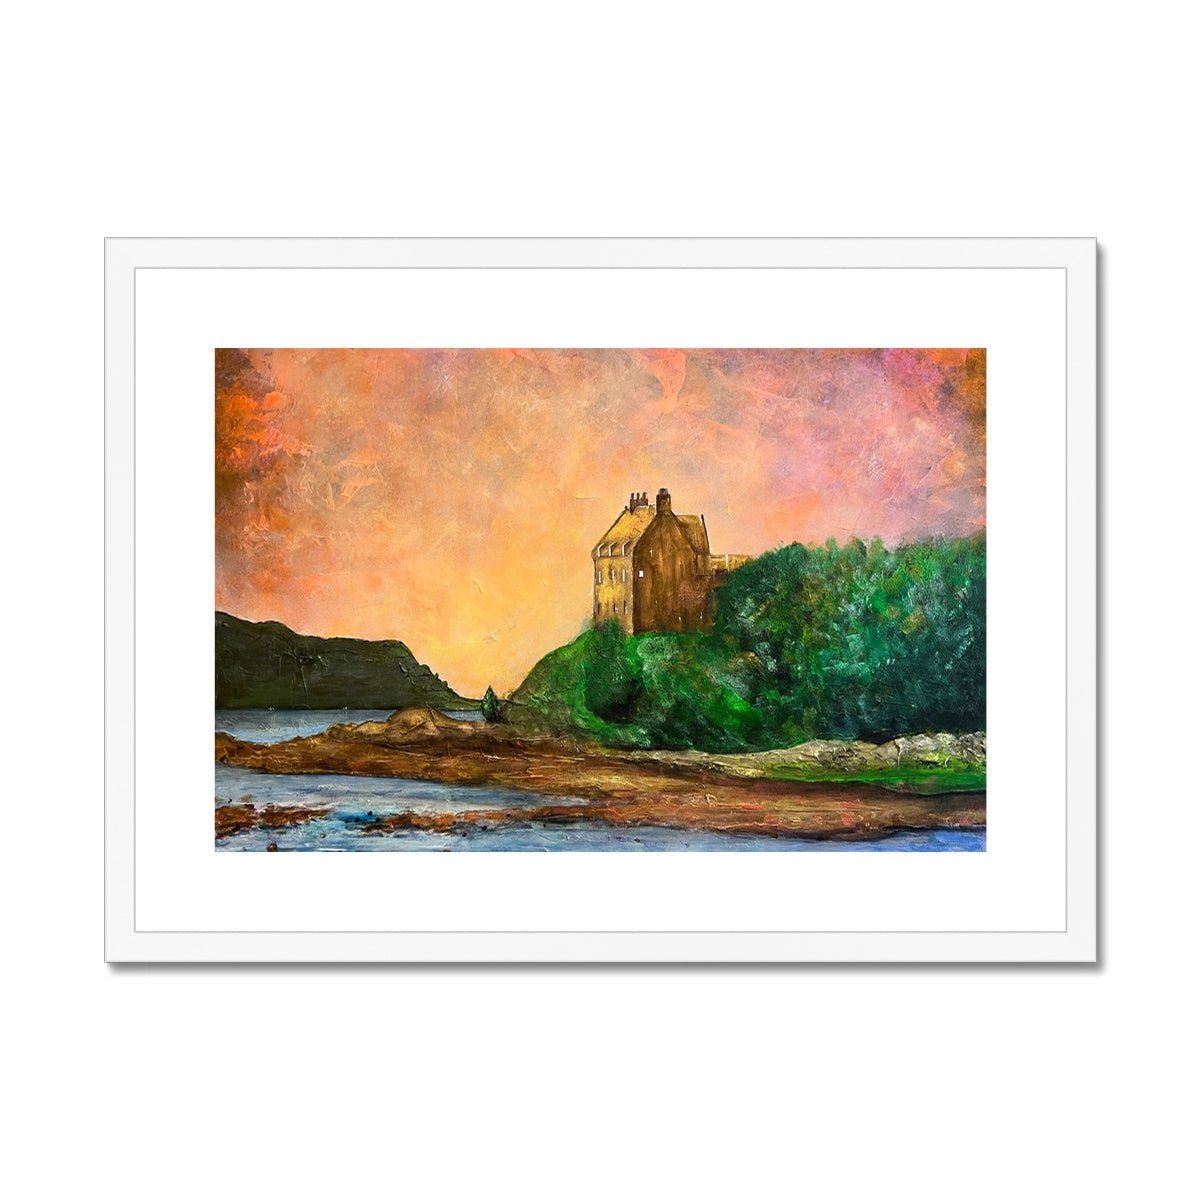 Duntrune Castle Painting | Framed & Mounted Prints From Scotland-Framed & Mounted Prints-Scottish Castles Art Gallery-A2 Landscape-White Frame-Paintings, Prints, Homeware, Art Gifts From Scotland By Scottish Artist Kevin Hunter